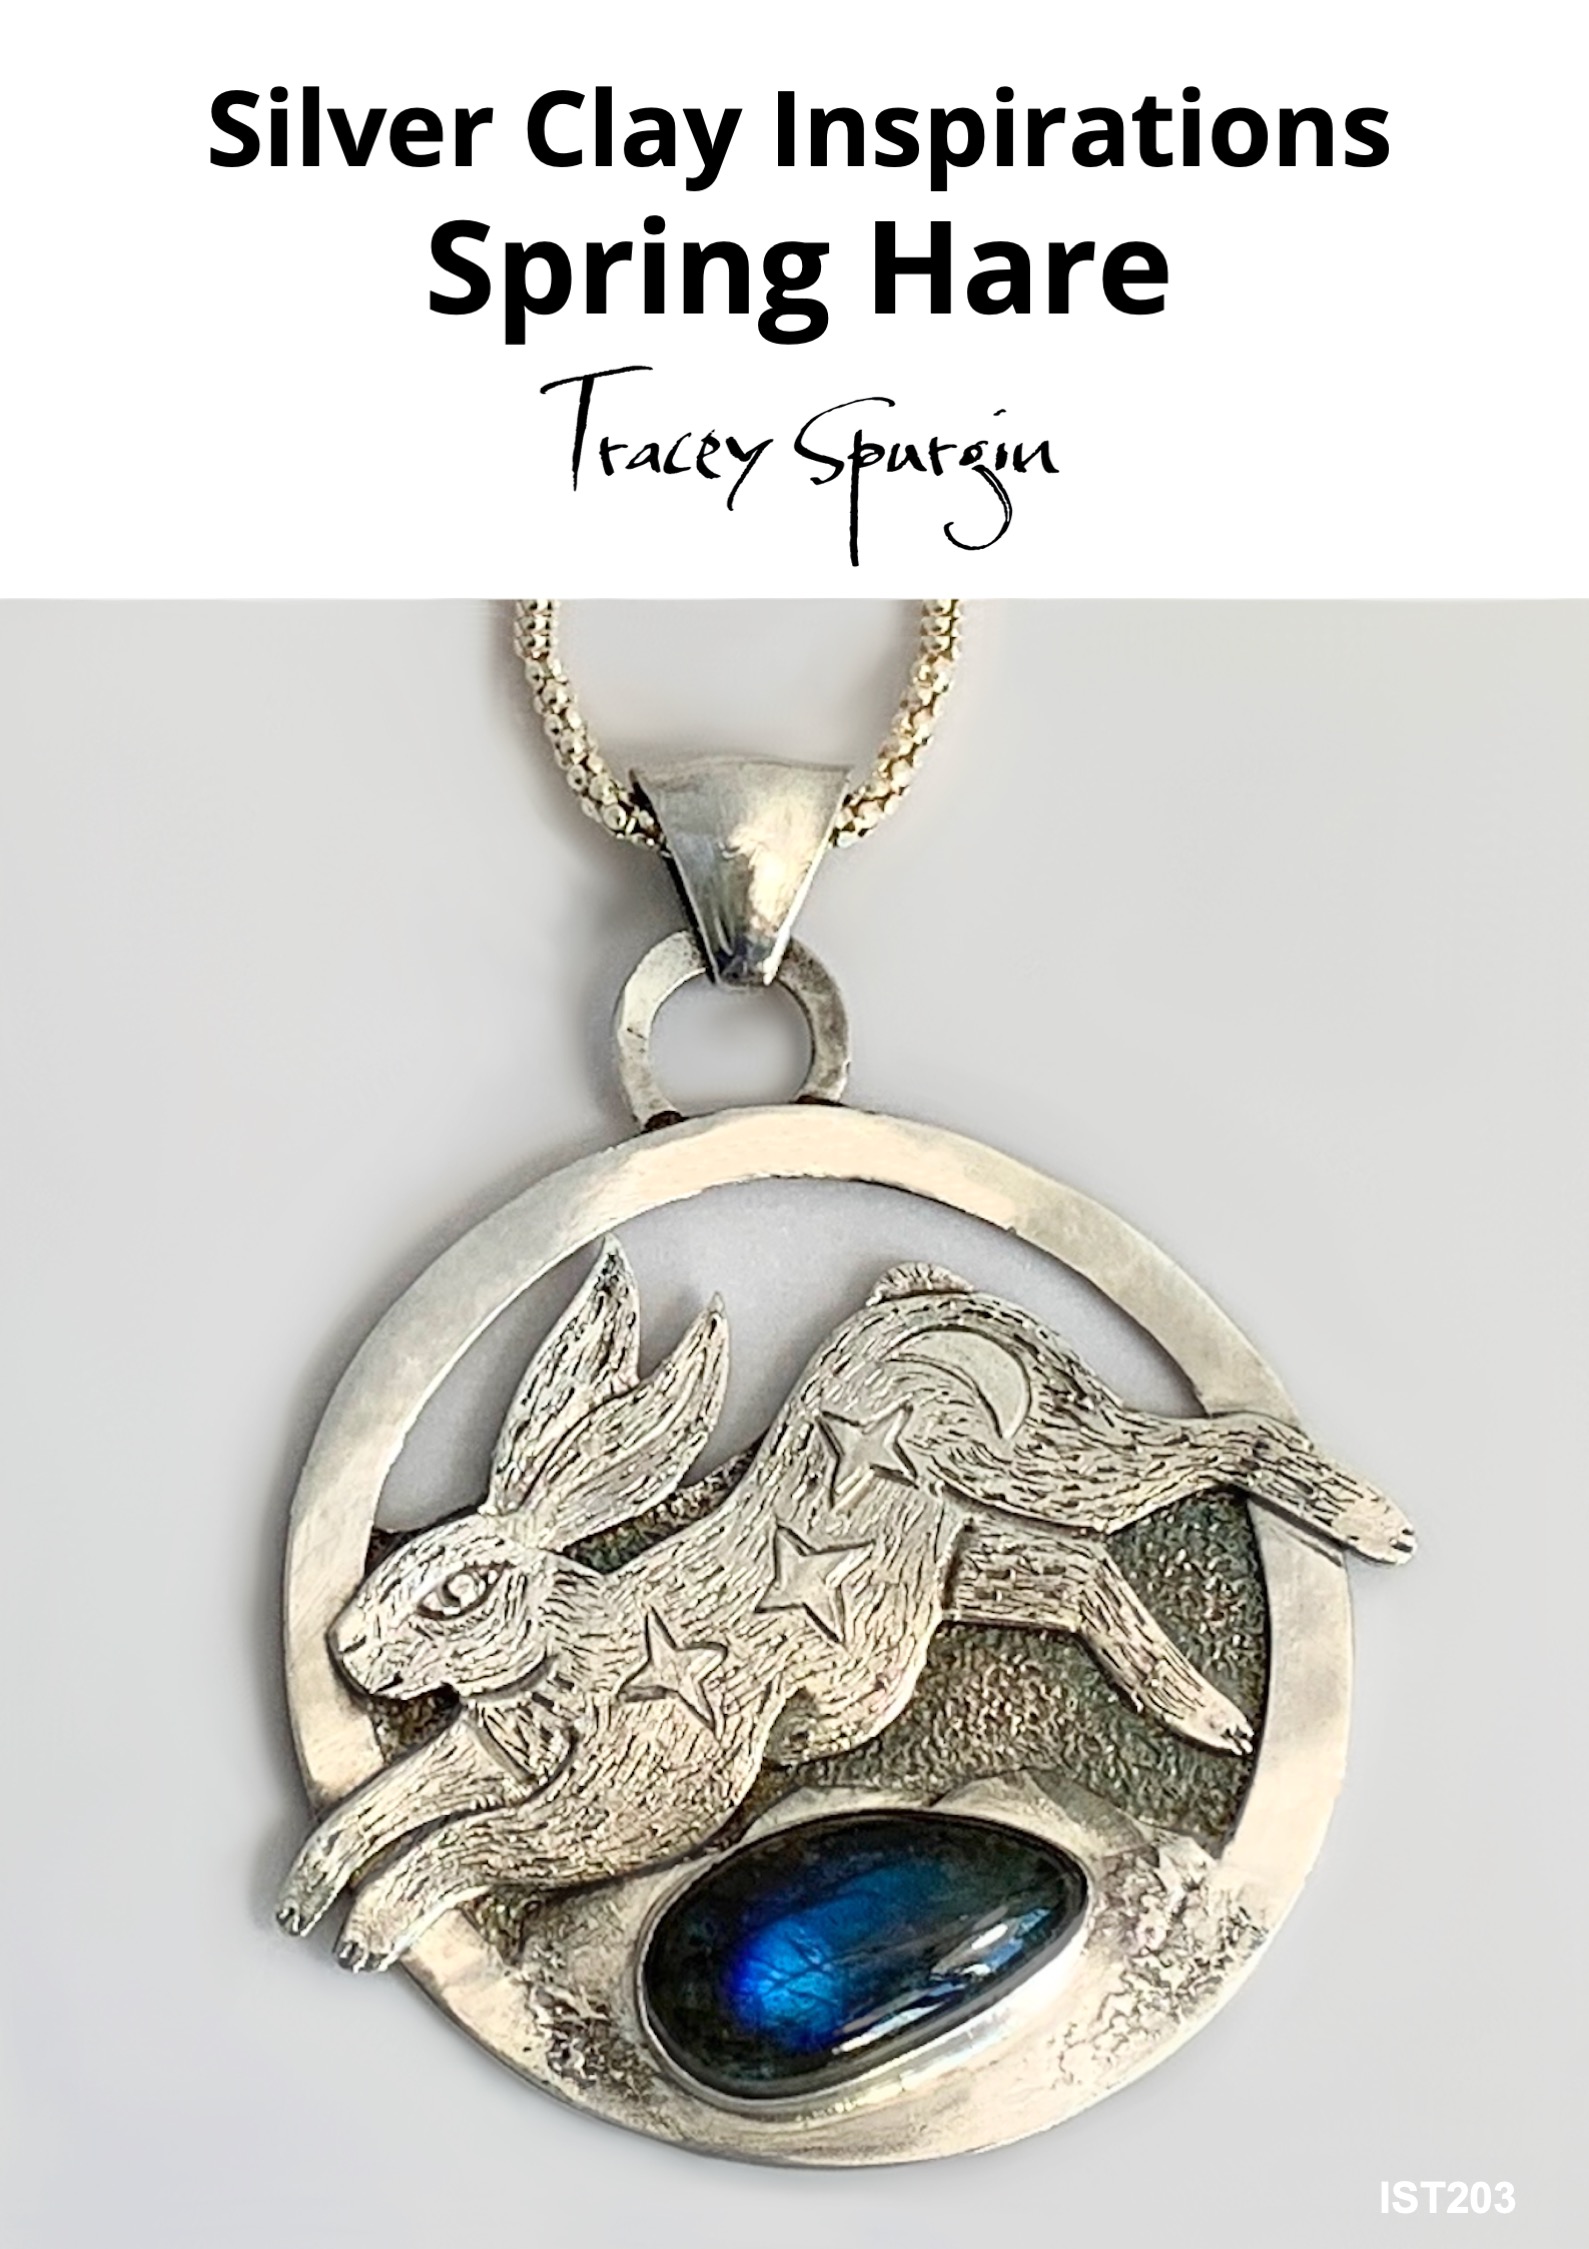 Tracey Spurgin Spring Hare Tutorial